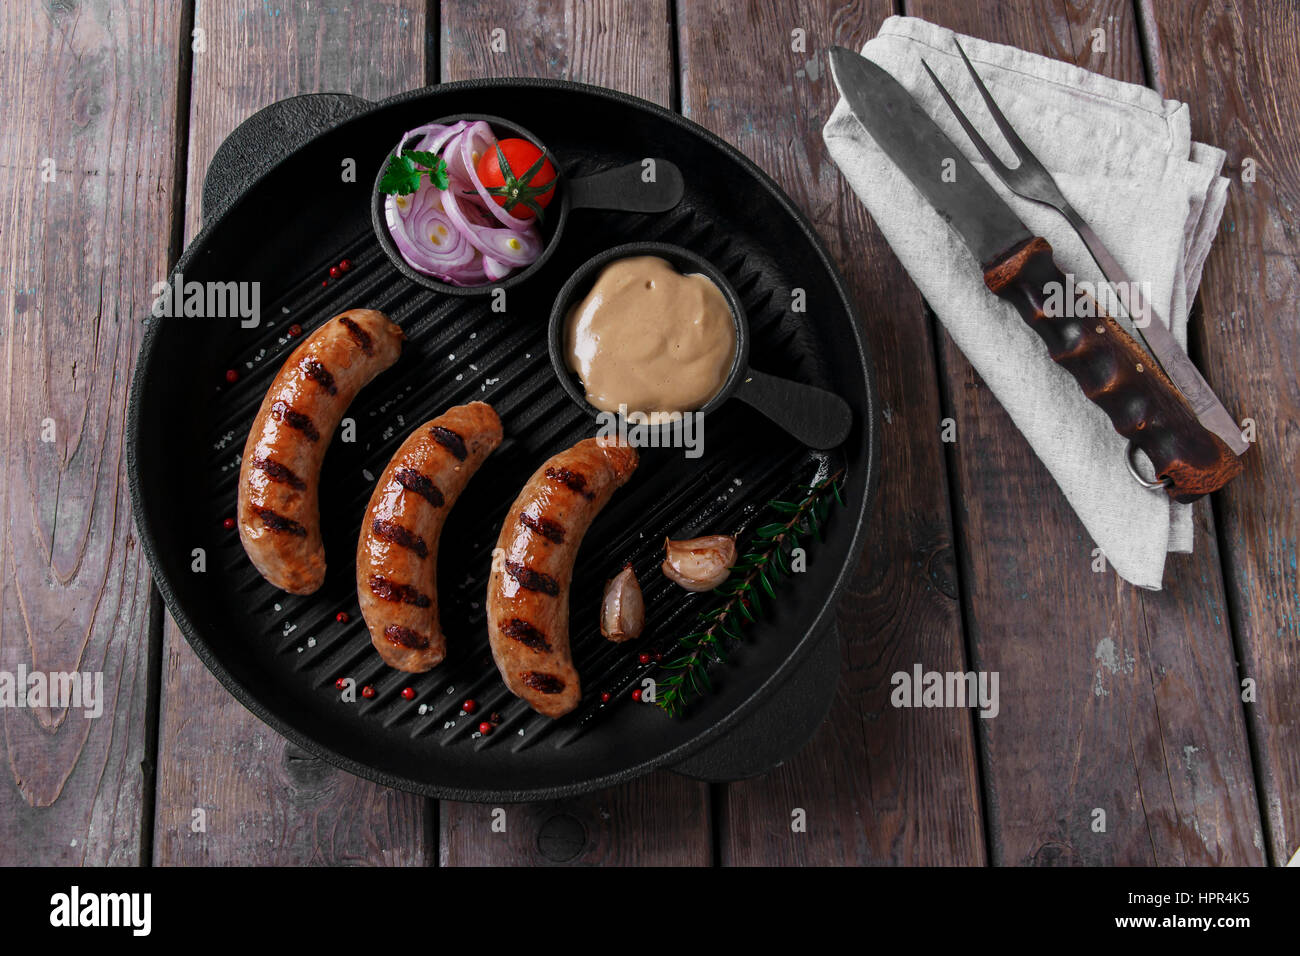 homemade grilled sausage with spices on grill Stock Photo